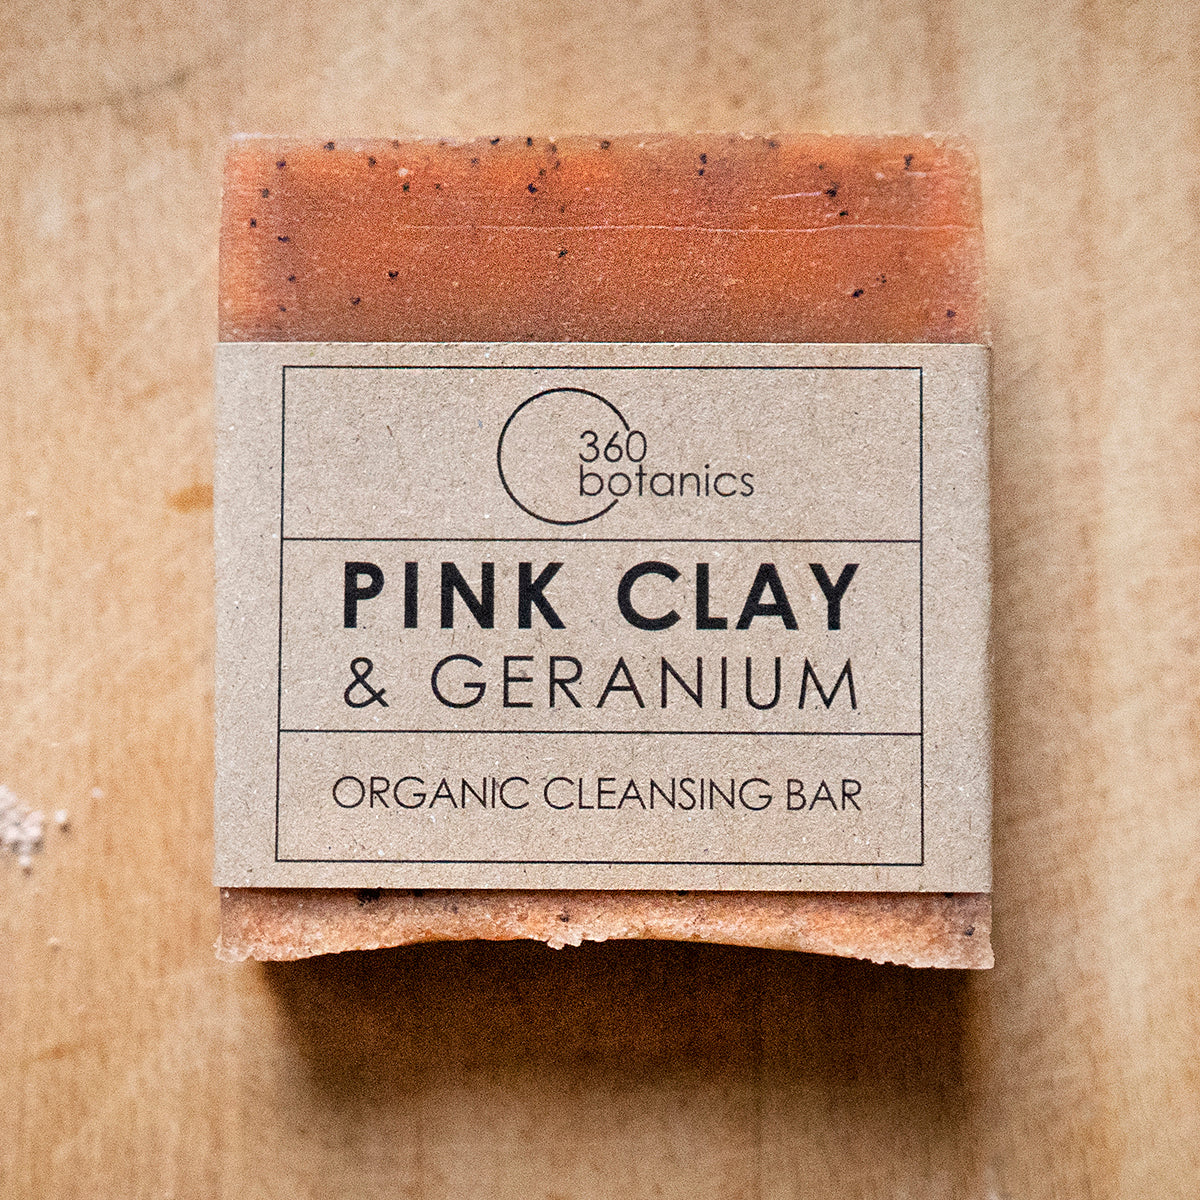 Pink clay and geranium soap photographed on grey marble